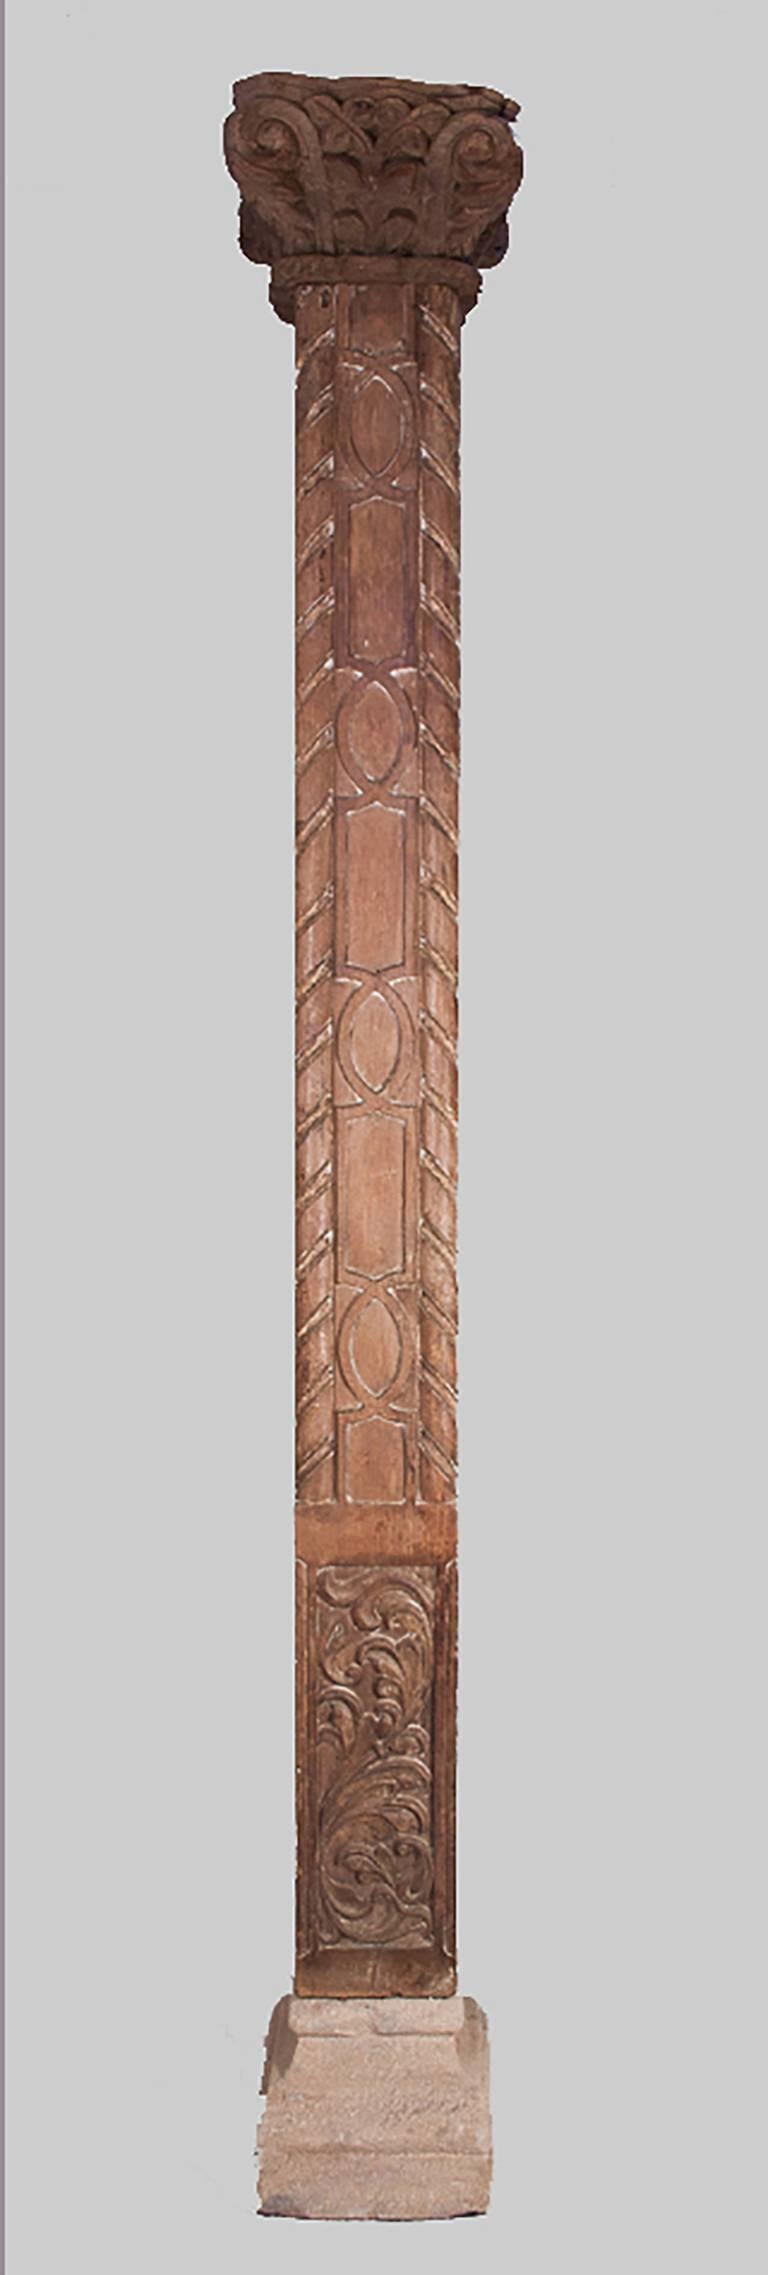 Pair of tall, slender, solid teak columns from Gujarat, India, circa 1880. These natural wood pillars feature very appealing hand-carved details accentuated by traces of original paint. Set in simple stone bases with relatively small footprints, the